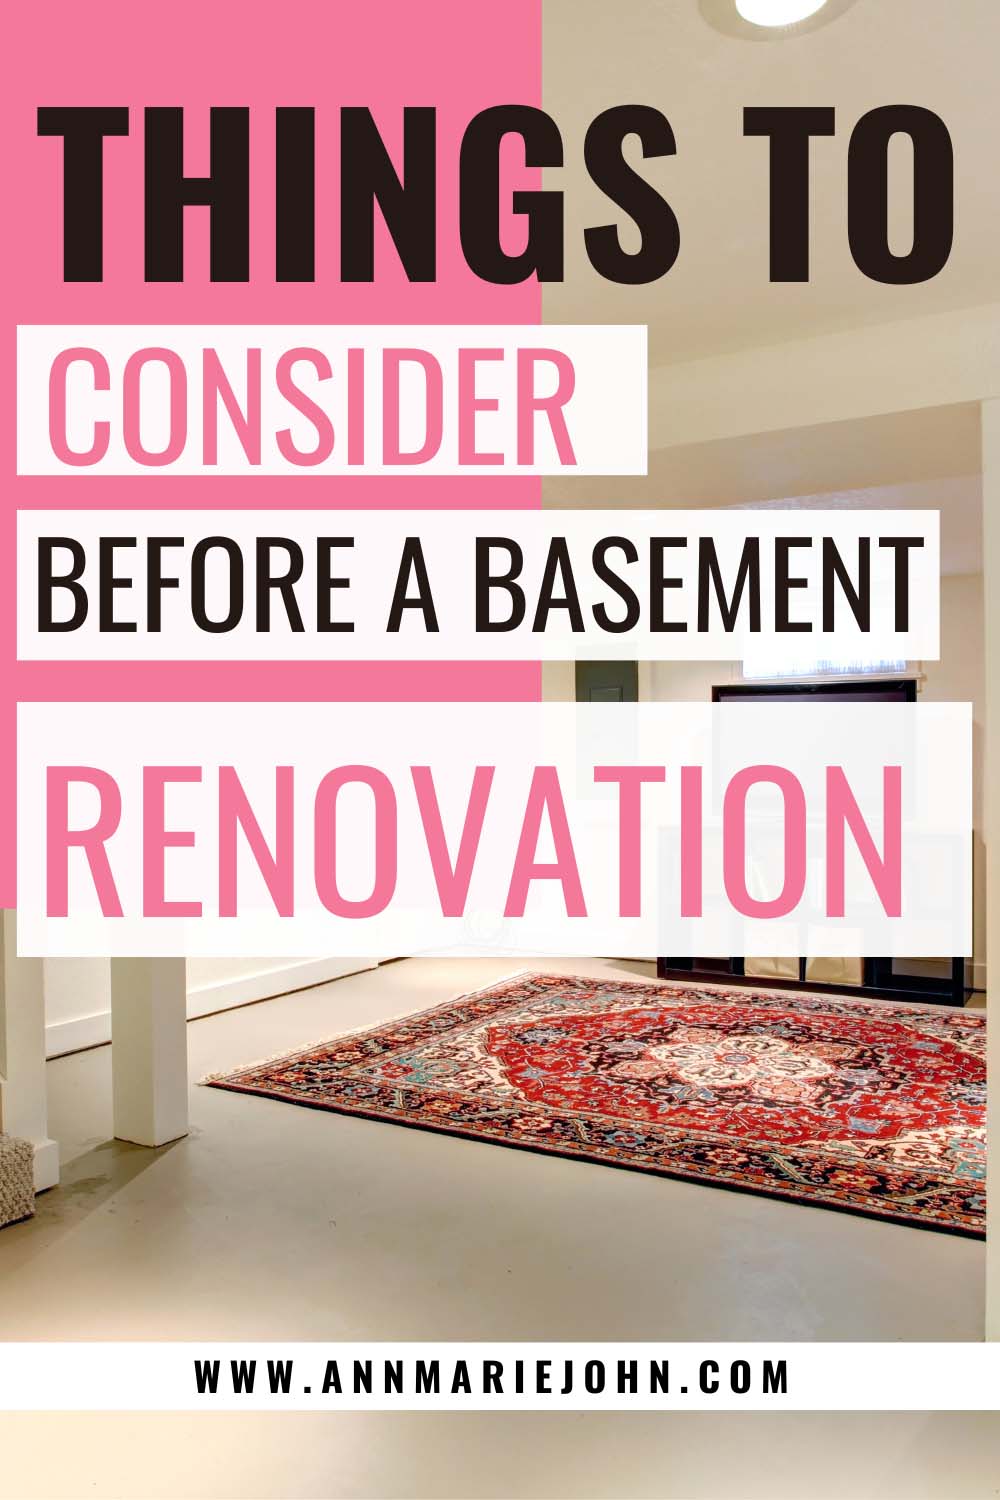 Things to Consider Before A Basement Renovation